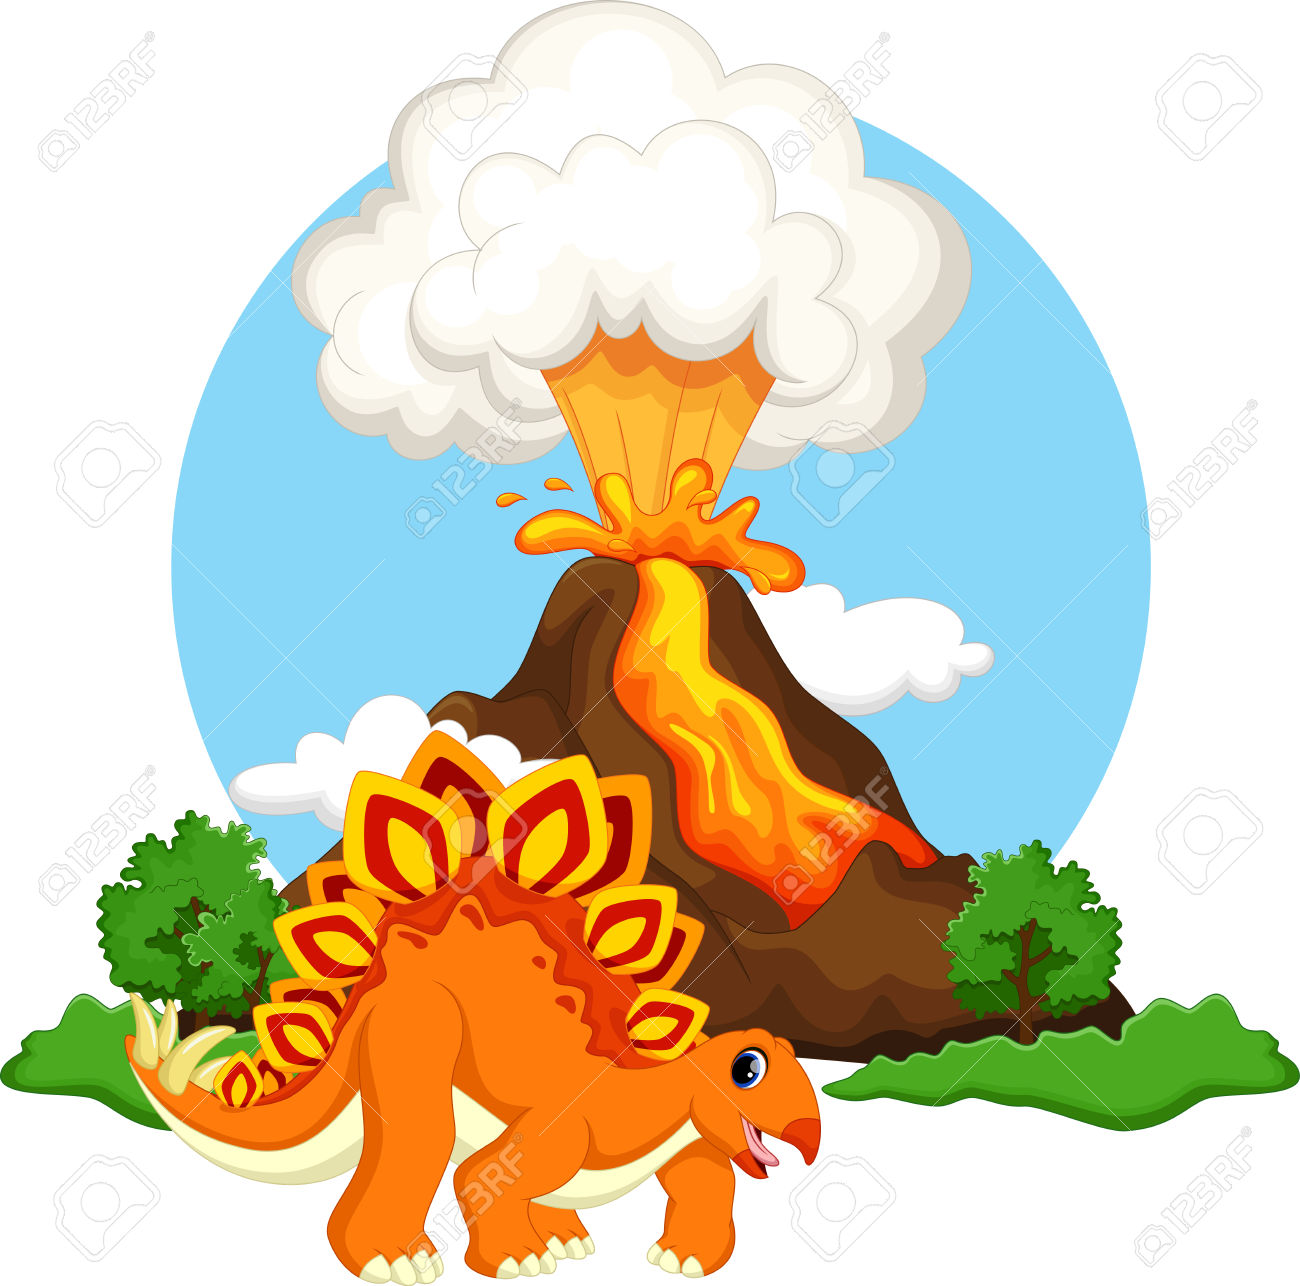 Images free download best. Clipart dinosaur volcano